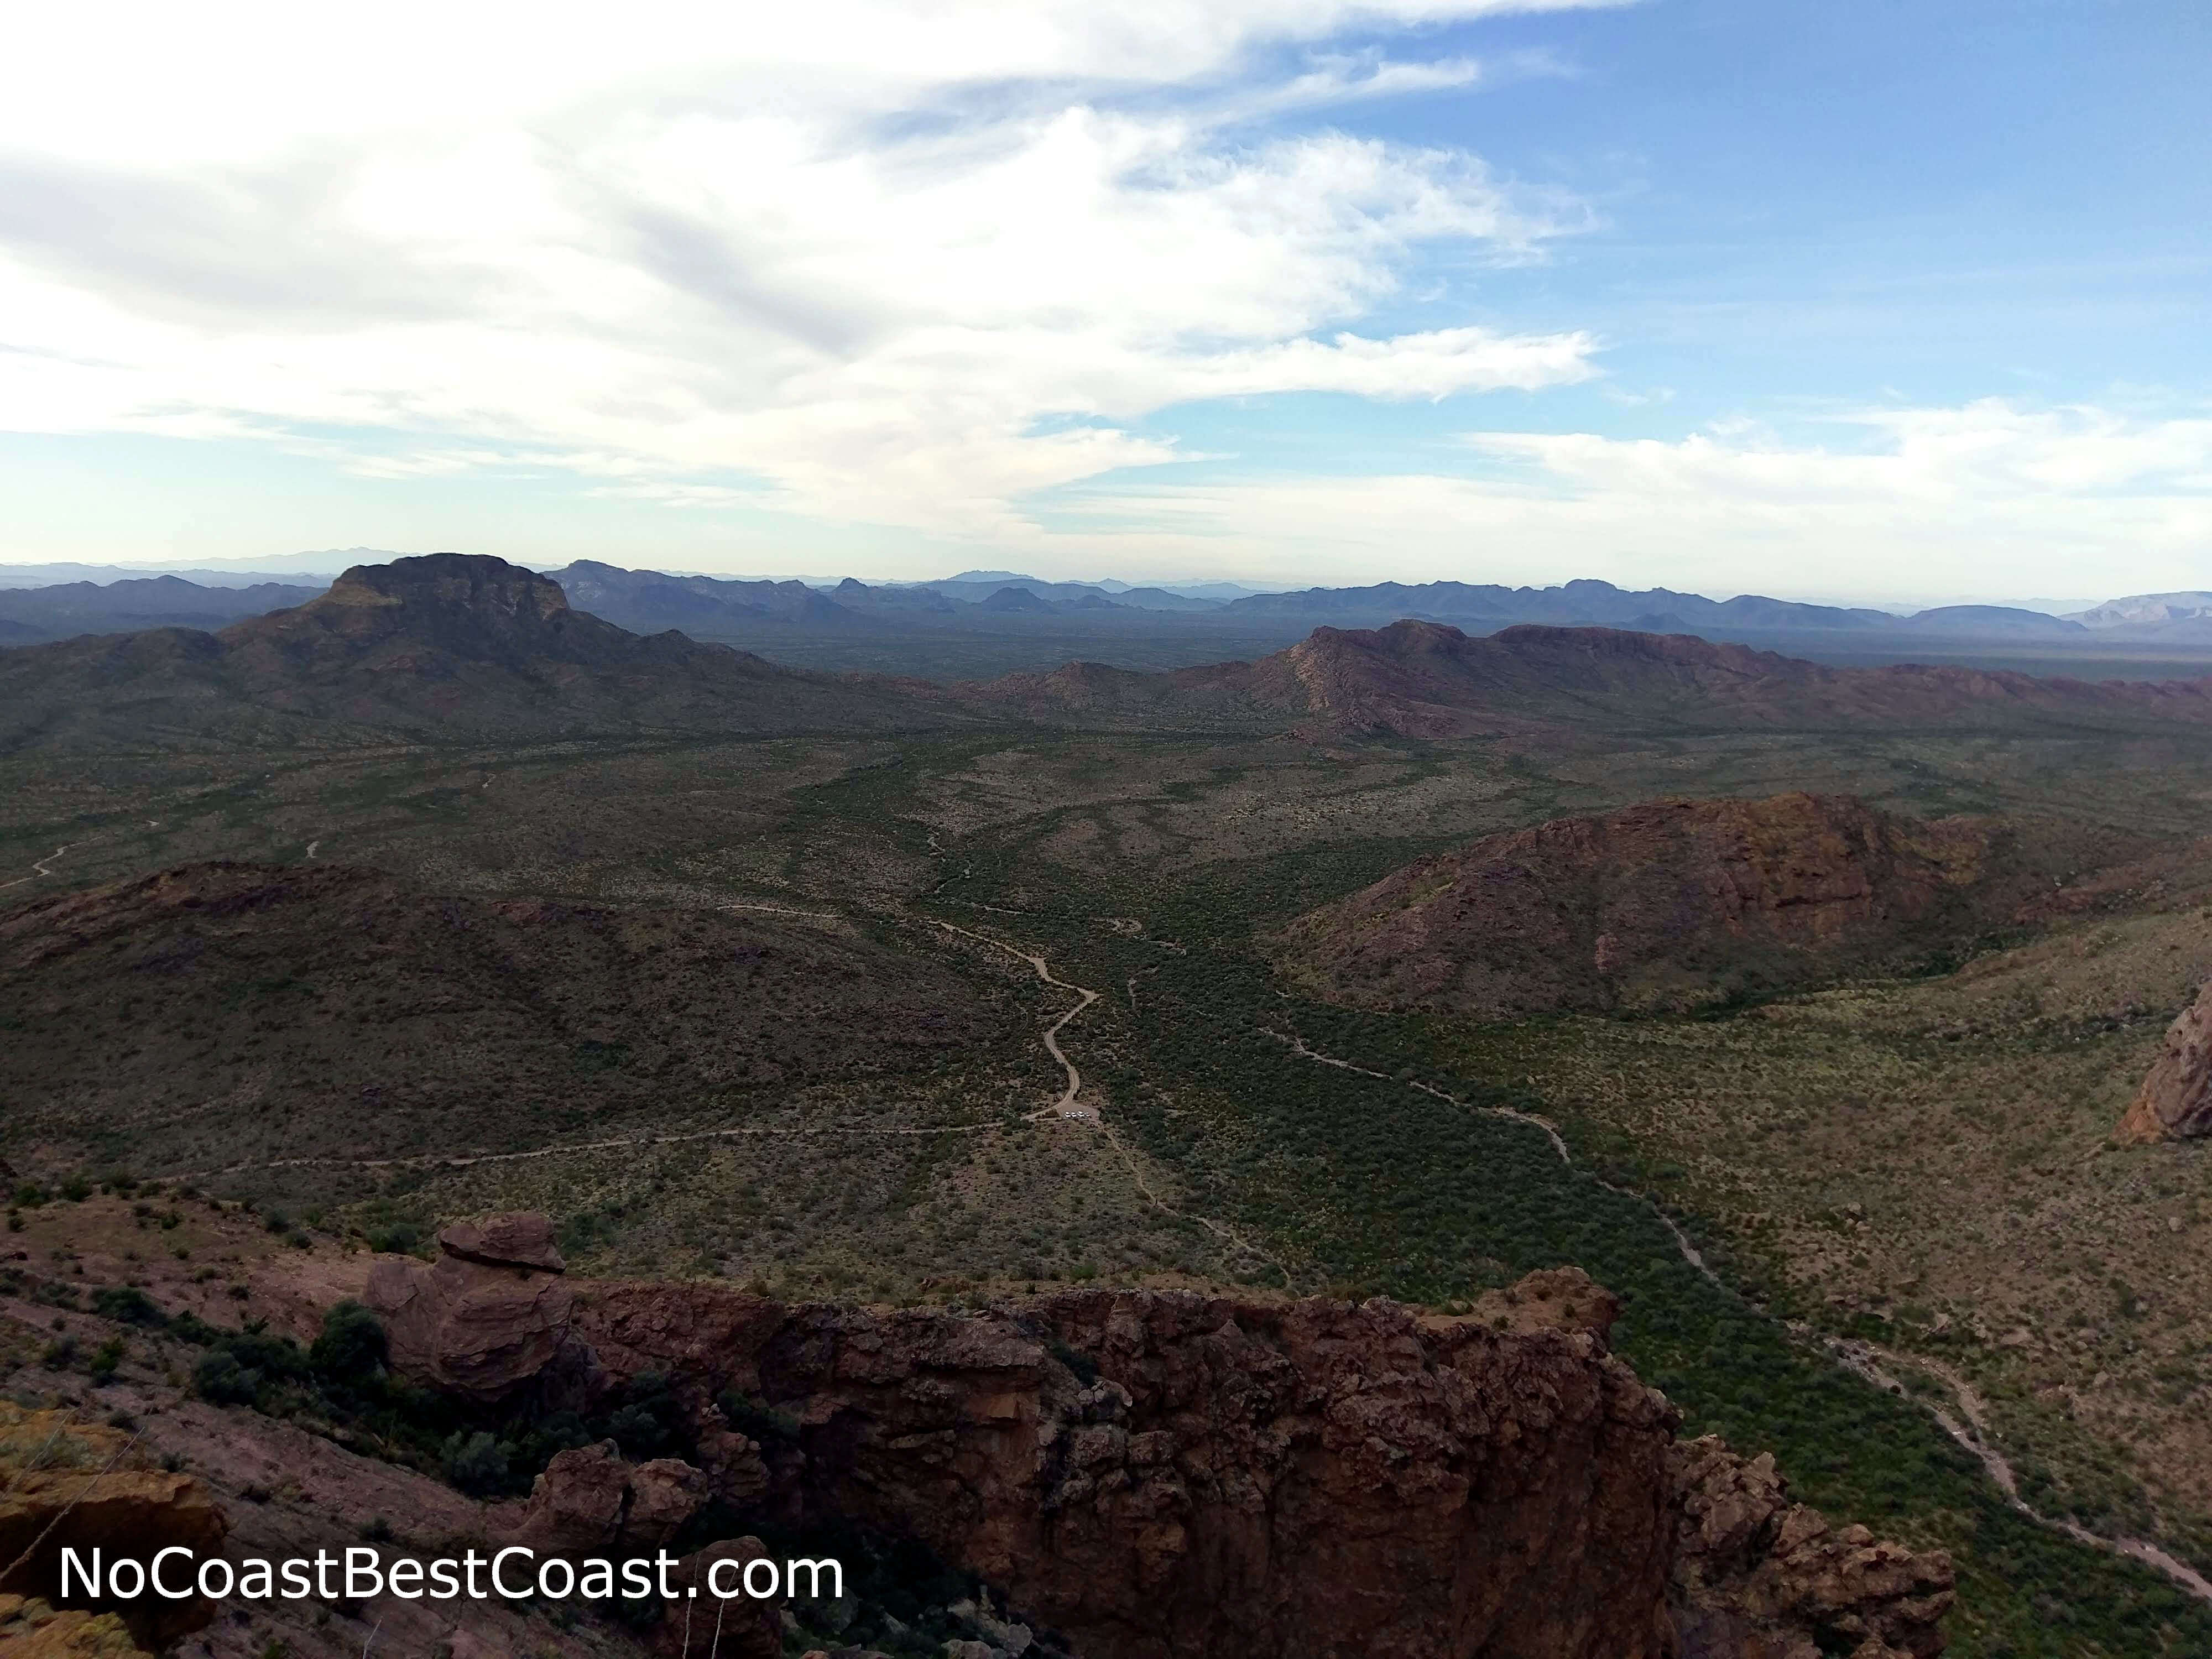 This view of Organ Pipe Cactus National Monument awaits you on the other side of the arch